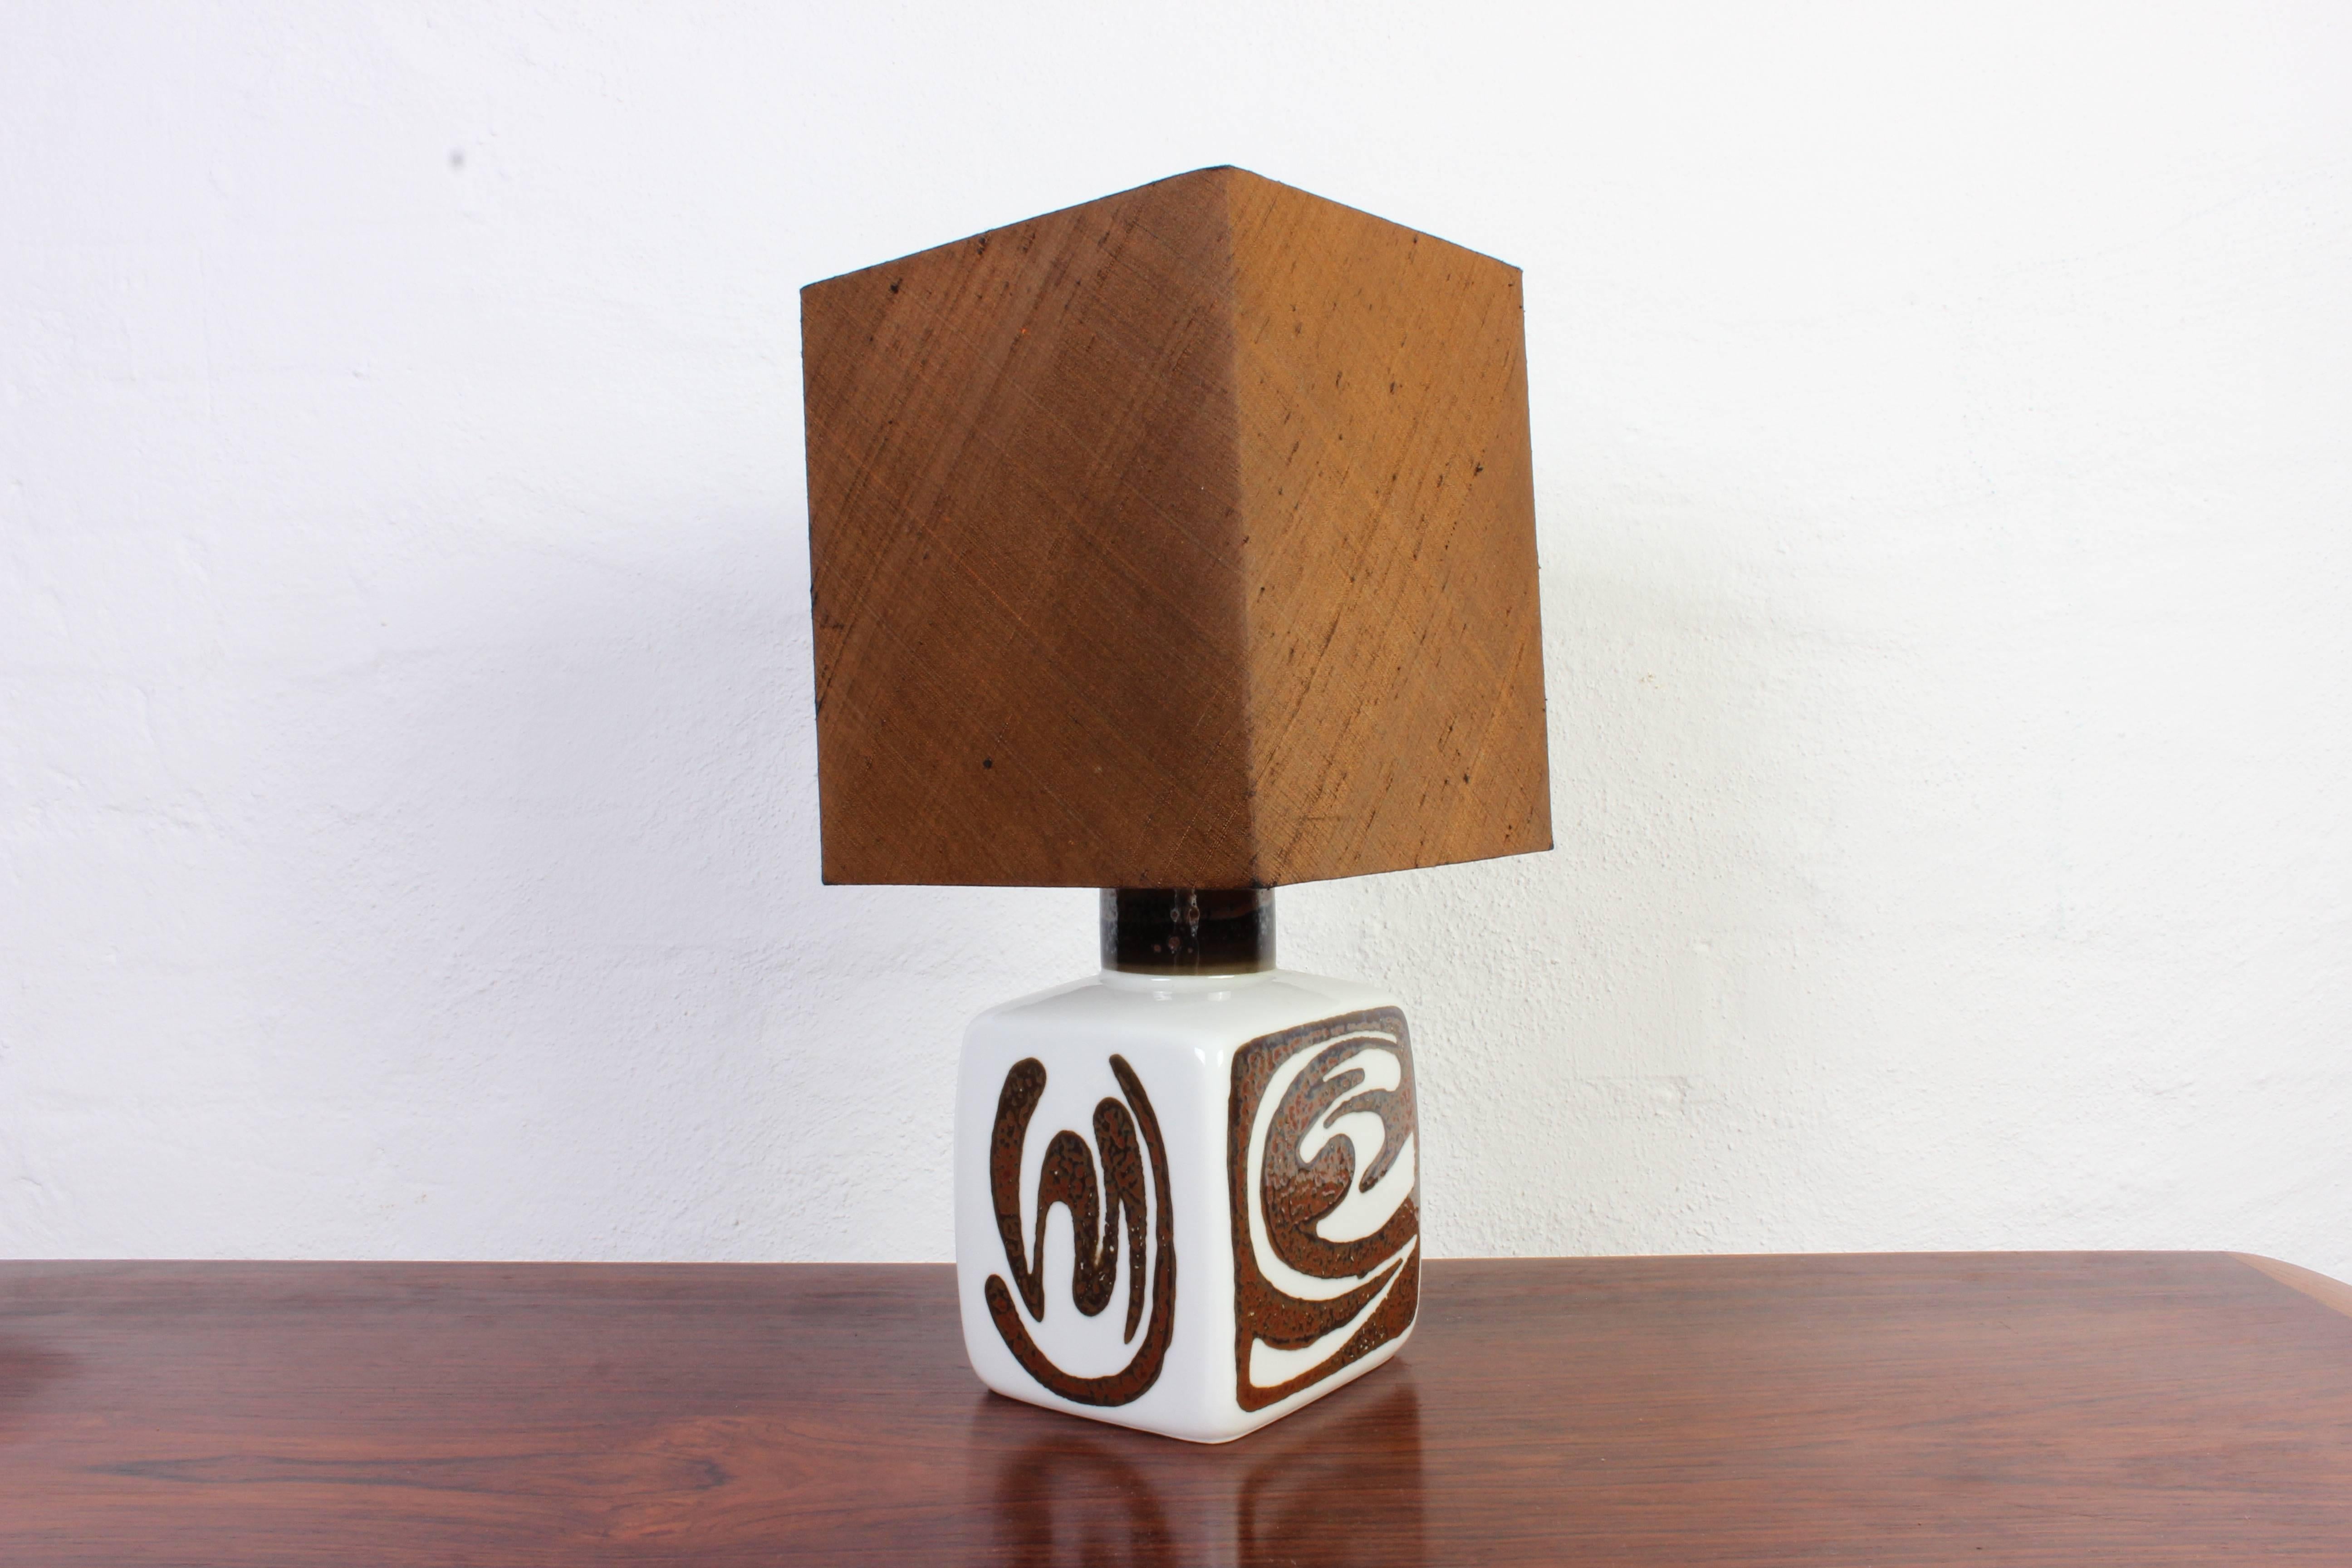 This ceramic table lamp is designed by Swedish designer Carl-Harry Stålhane and produced by Rörstrands. The lamp comes with its original brown lamp shade and new wiring for US sockets.

